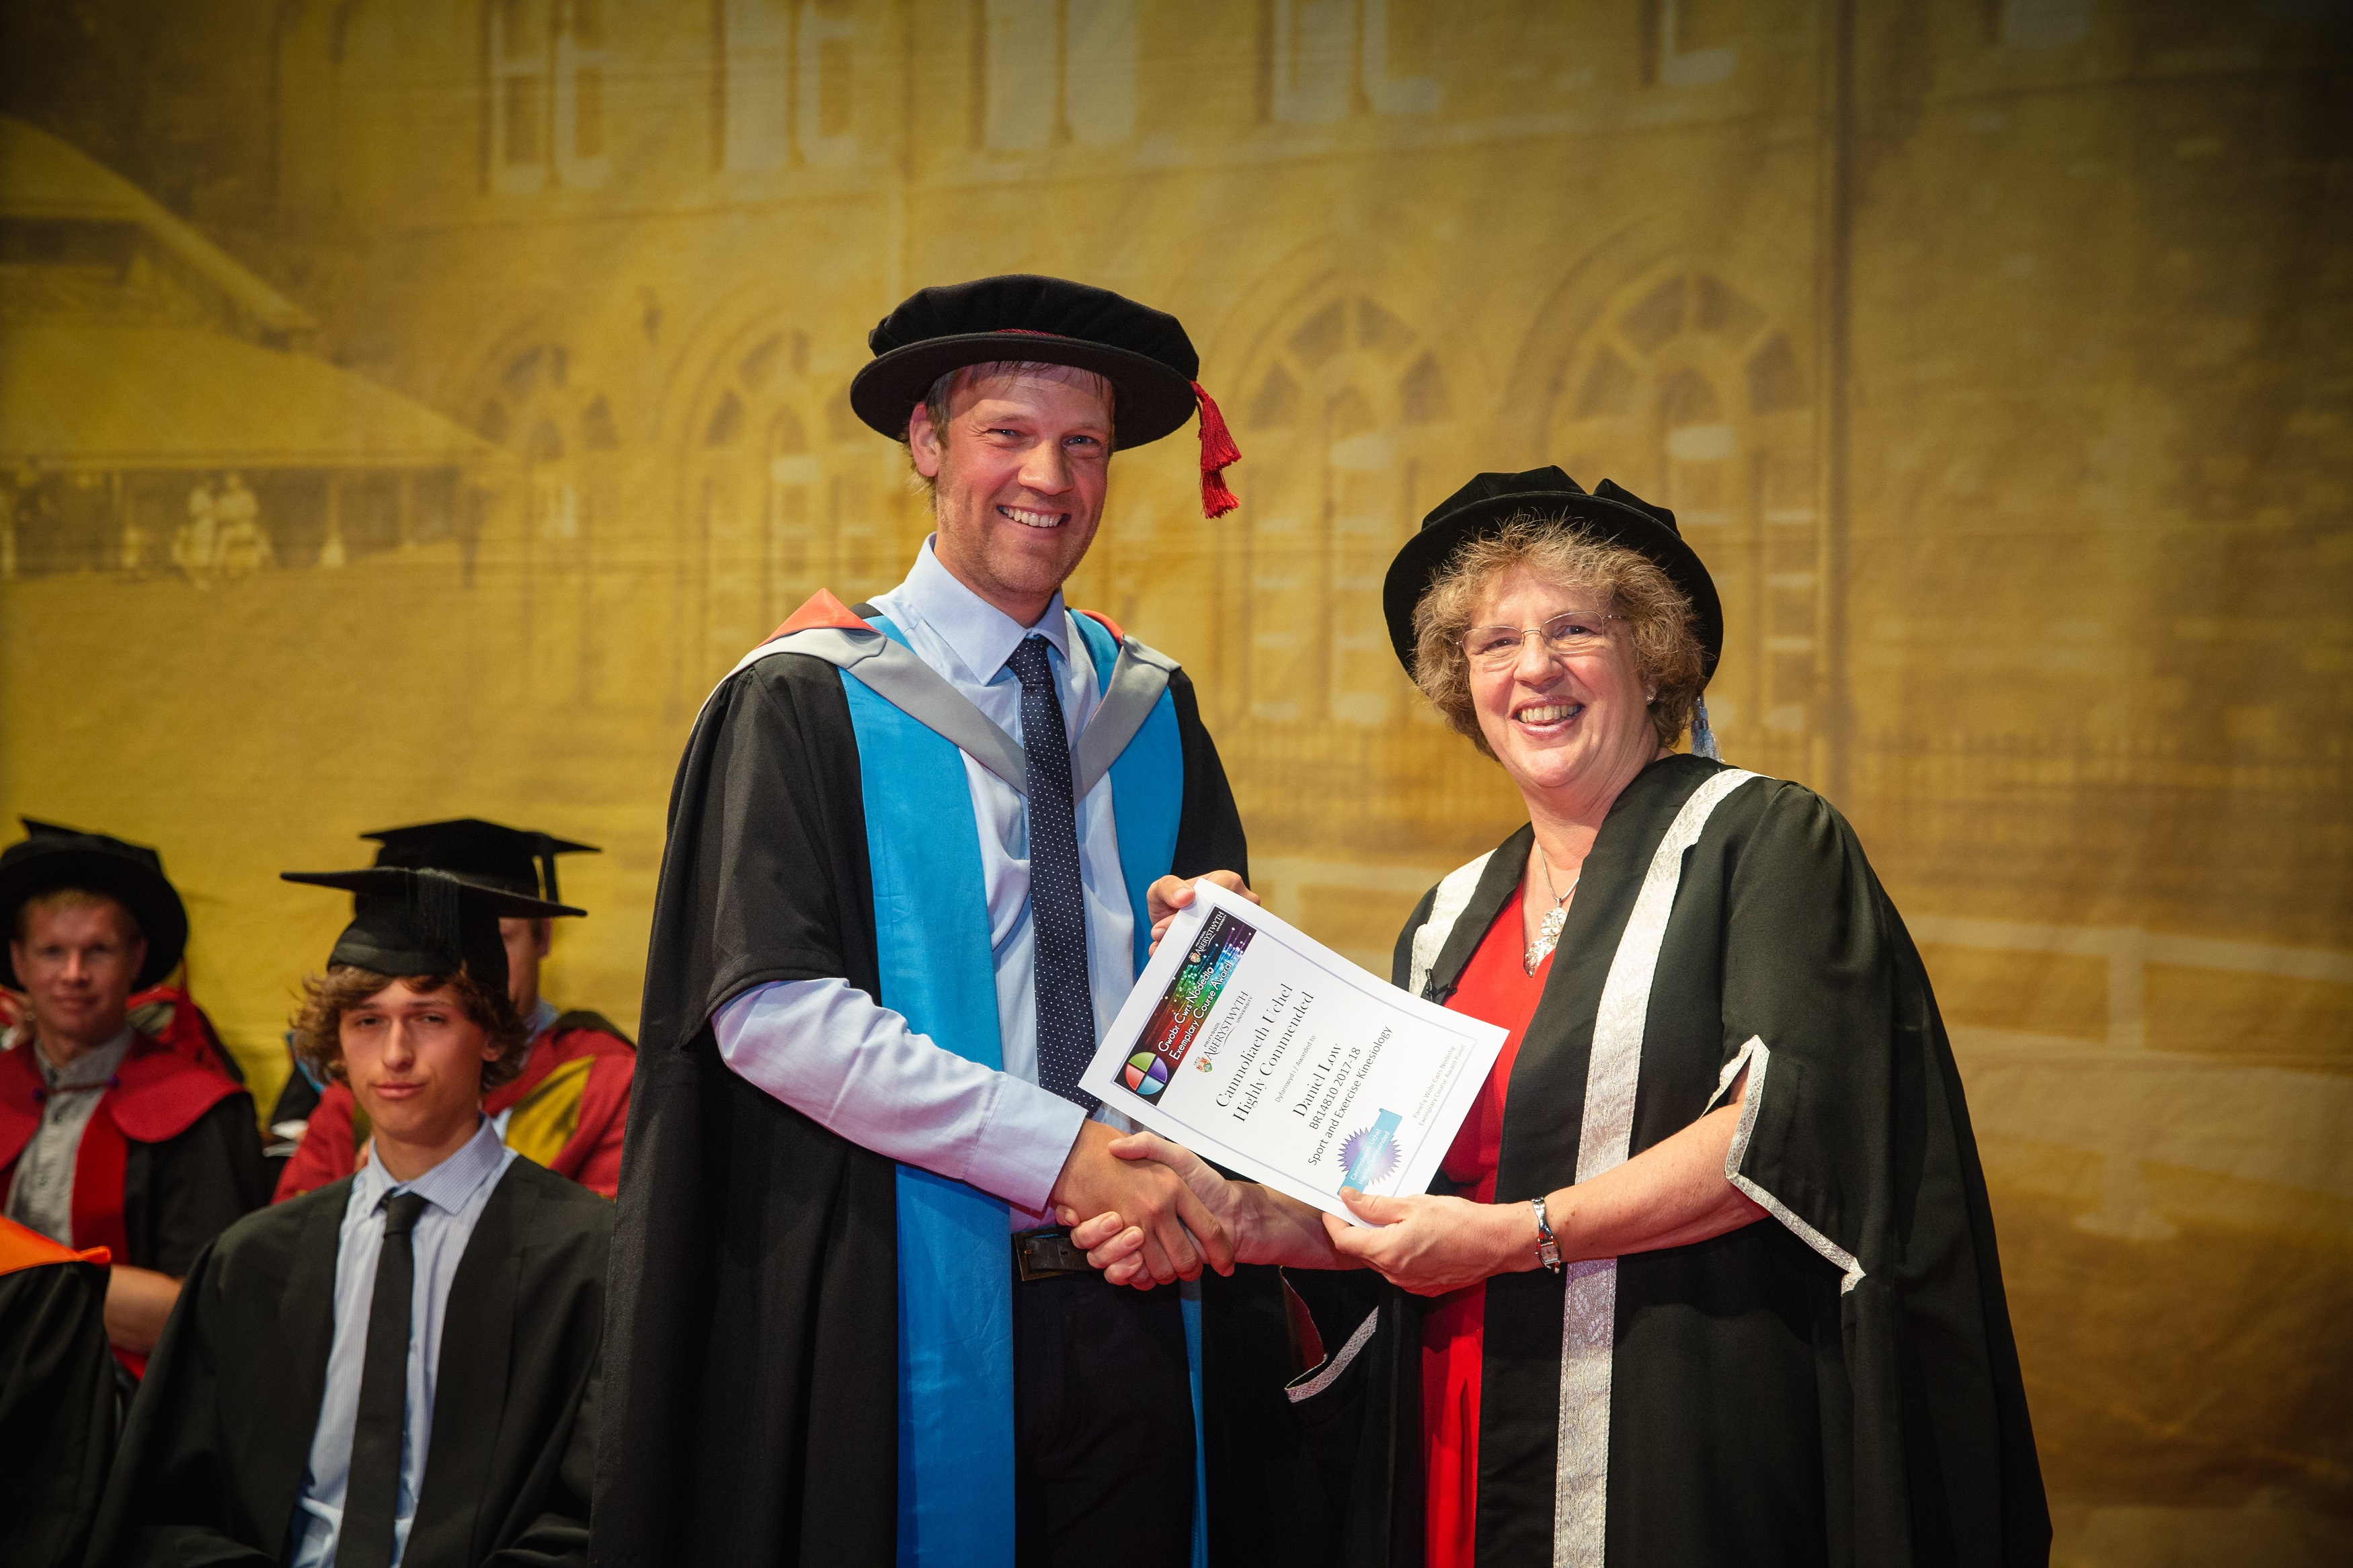 Dr Daniel Low from the Institute of Biological, Environmental and Rural Sciences receiving his highly commended certificate in the 2017-18 Exemplary Course Awards from Vice-Chancellor Professor Elizabeth Treasure during Graduation Week 2018